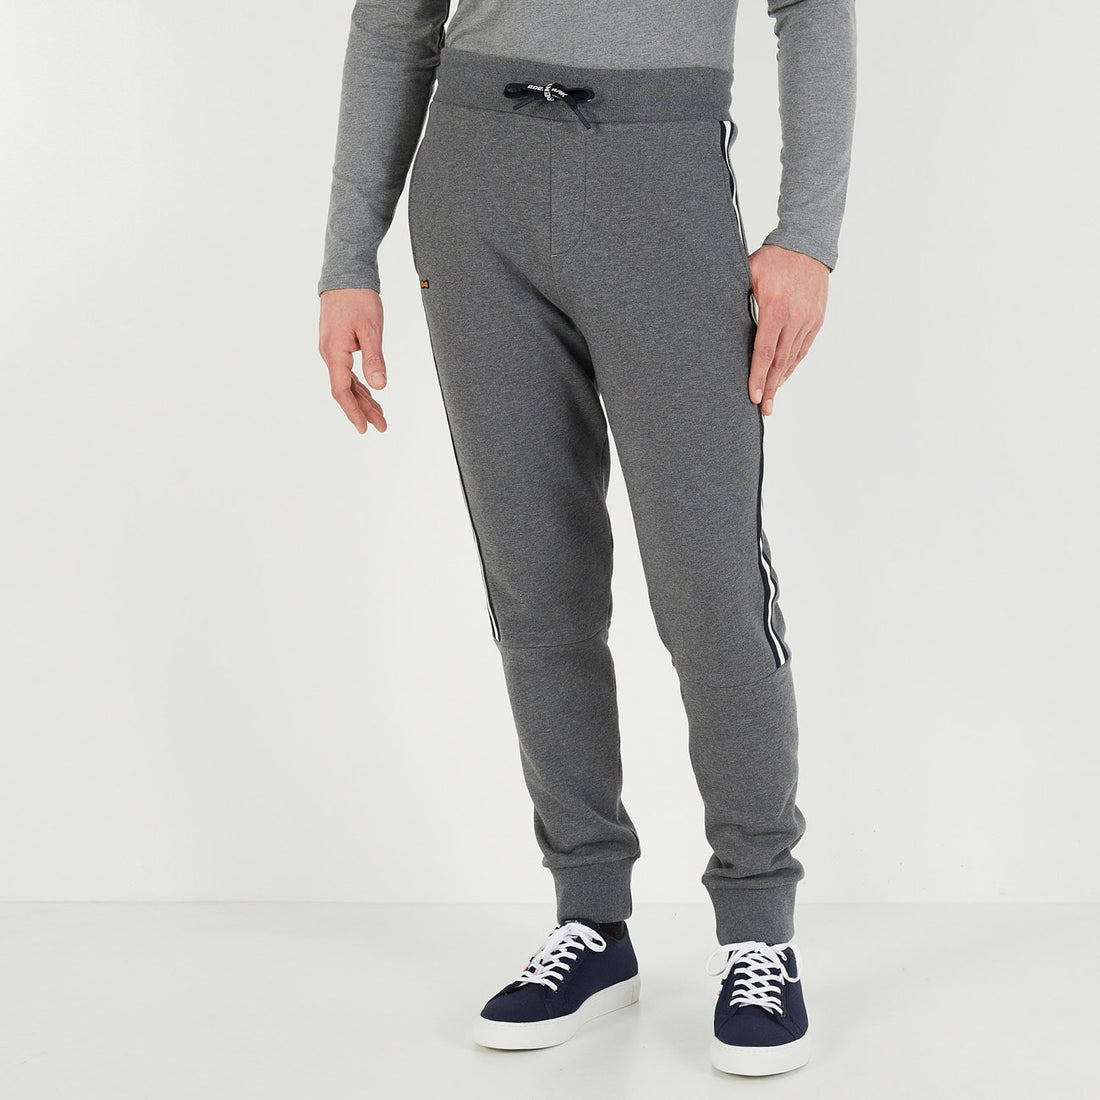 Dark Grey Jogging Bottoms With Contrasting Lateral Stripes_H23MAIJO0006_GRF_01